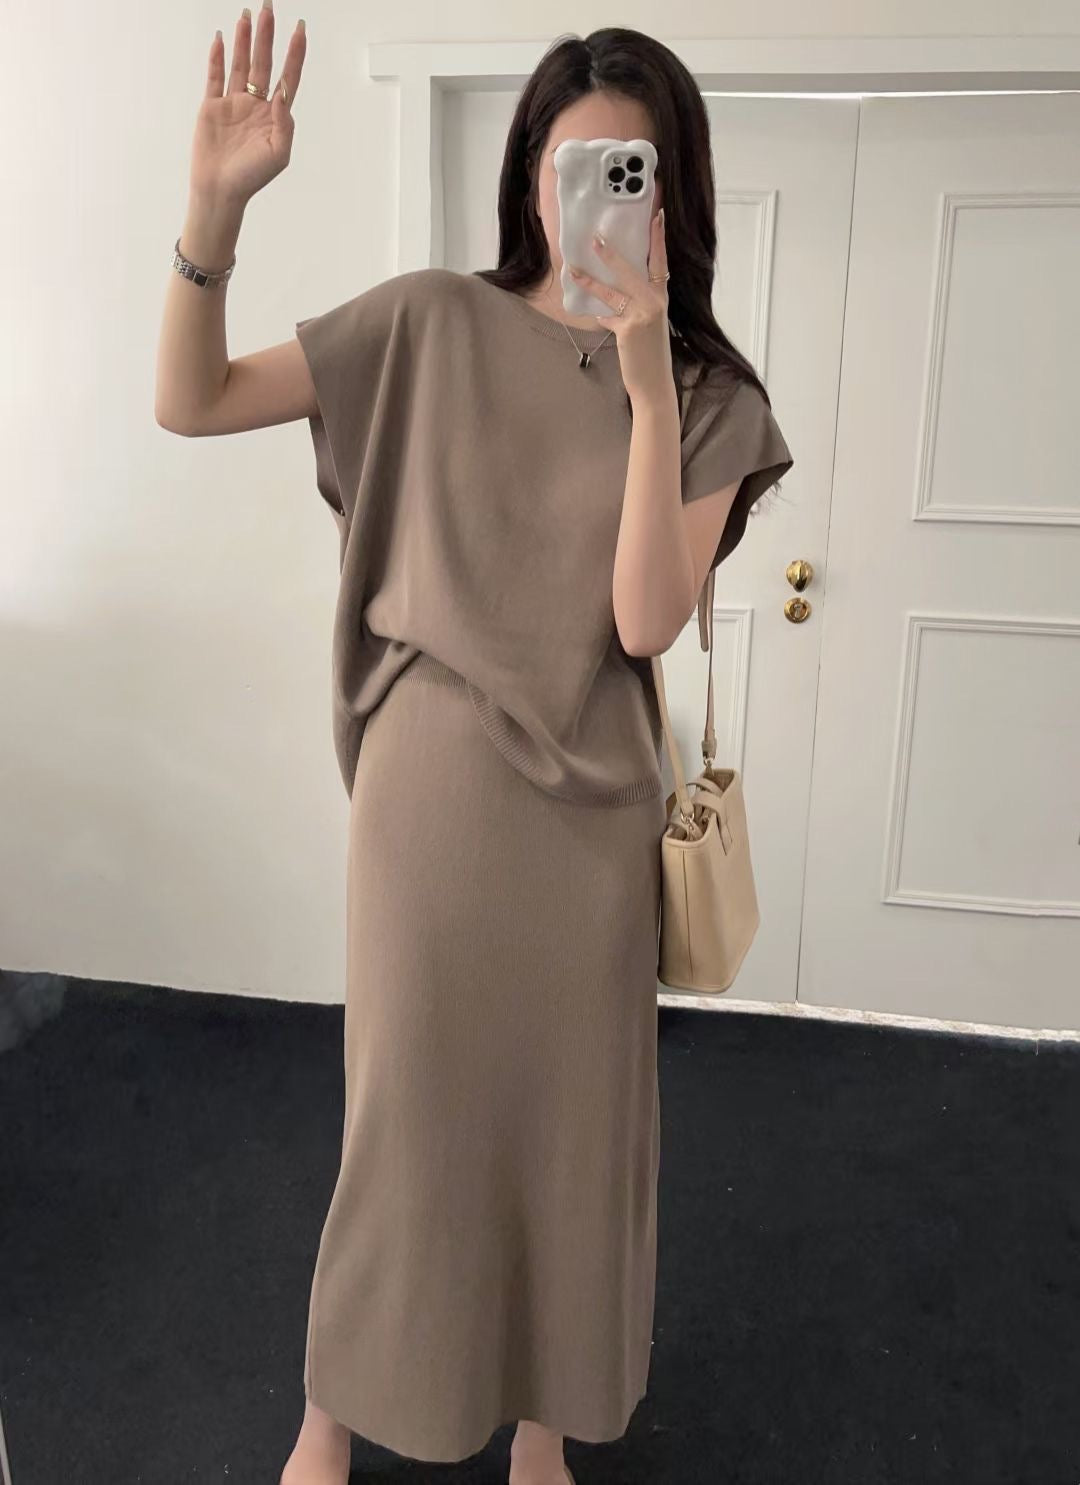 High Quality Knitted Loose Top & Back Slit Skirt 2 in 1 Coords Terno